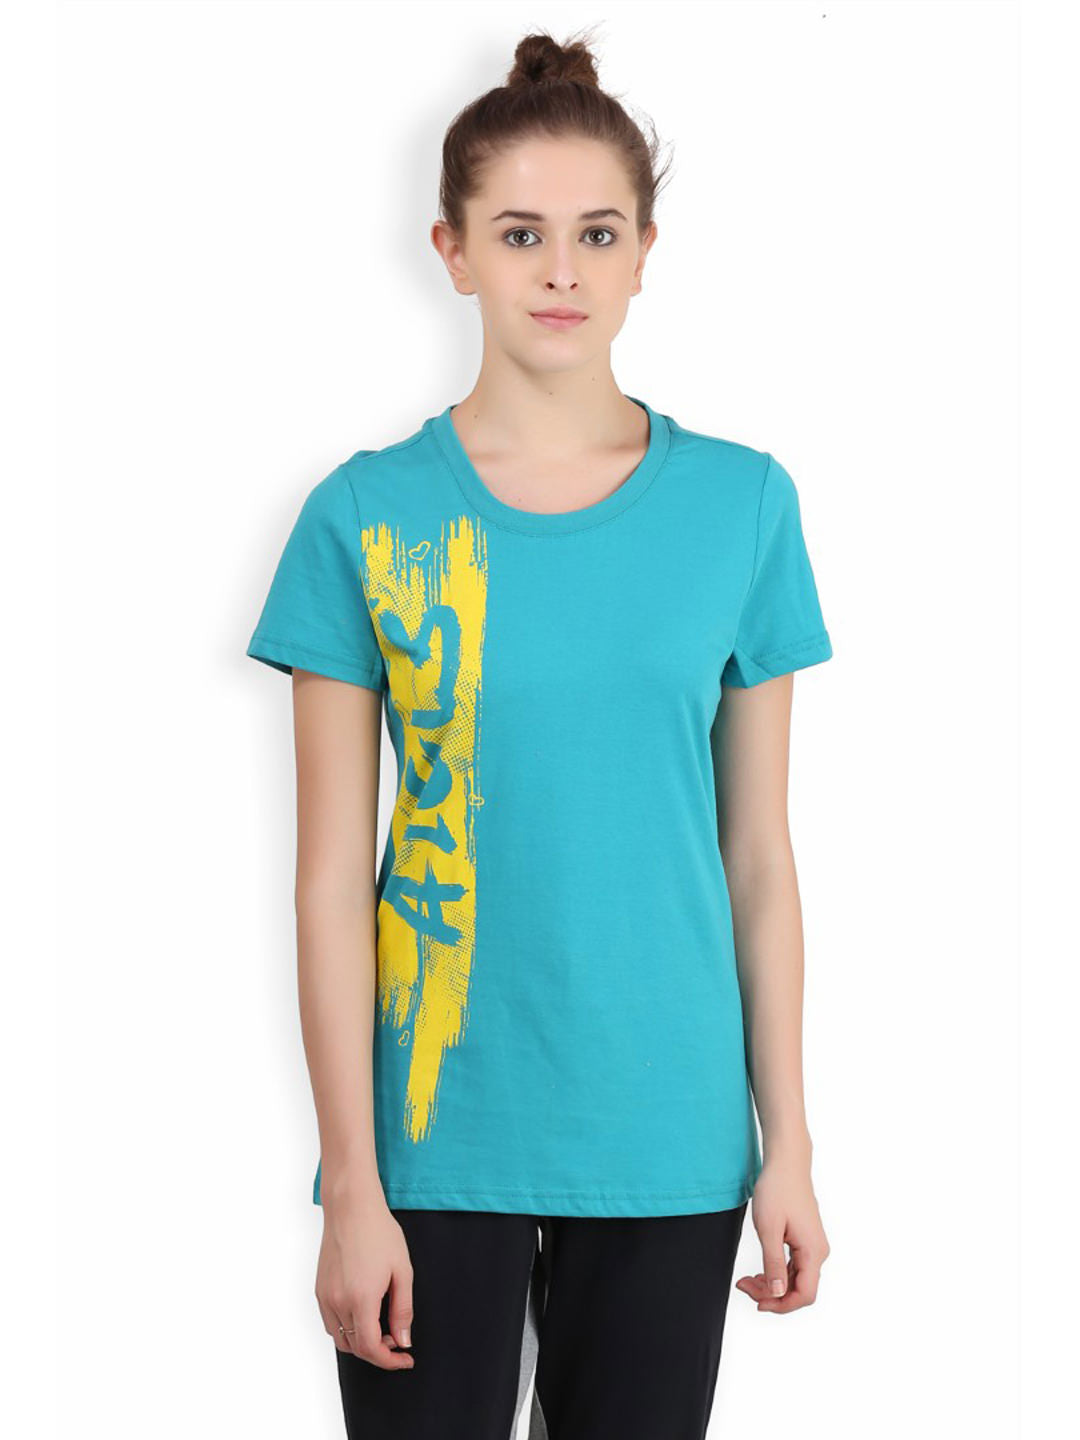 Alcis Women Solid Teal Tshirts ALWTS003018-XS